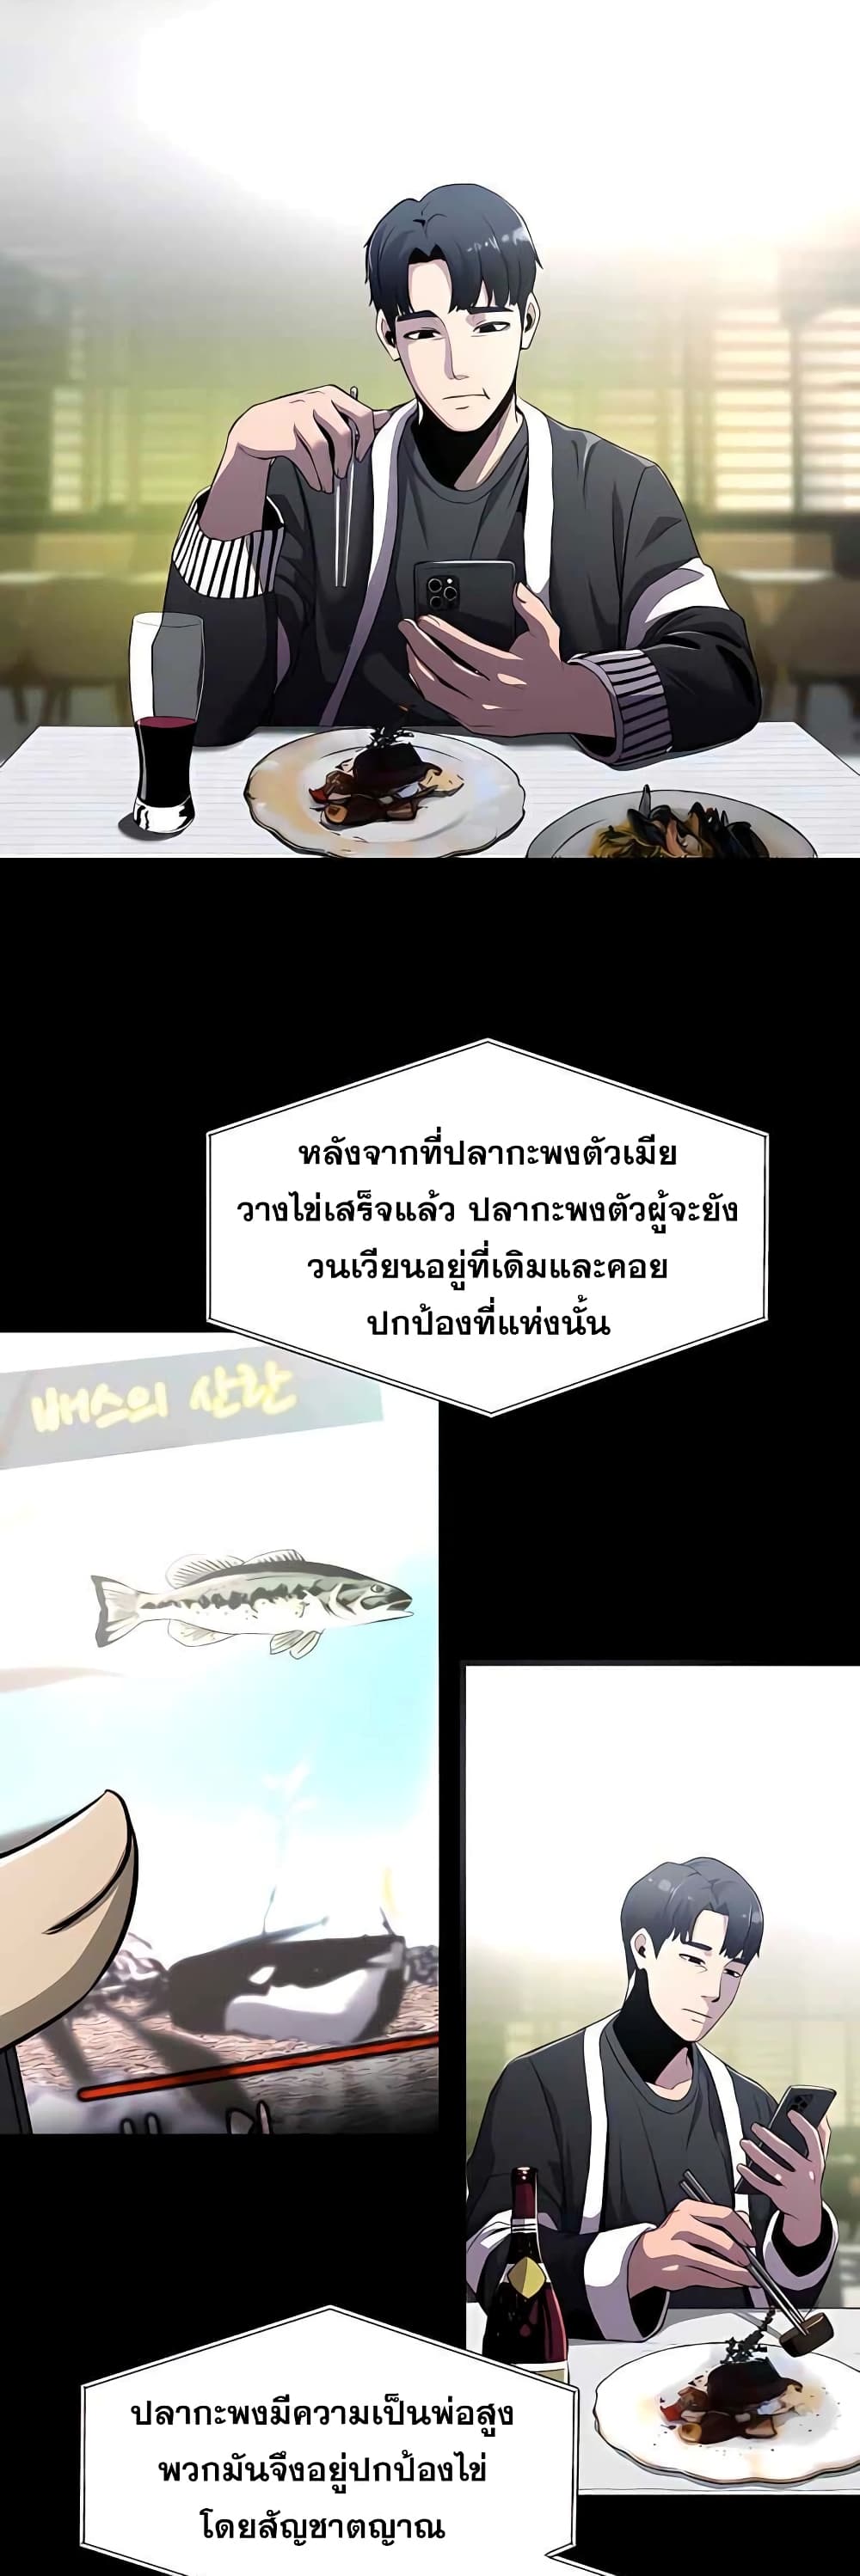 Surviving As a Fish ตอนที่ 3 (11)